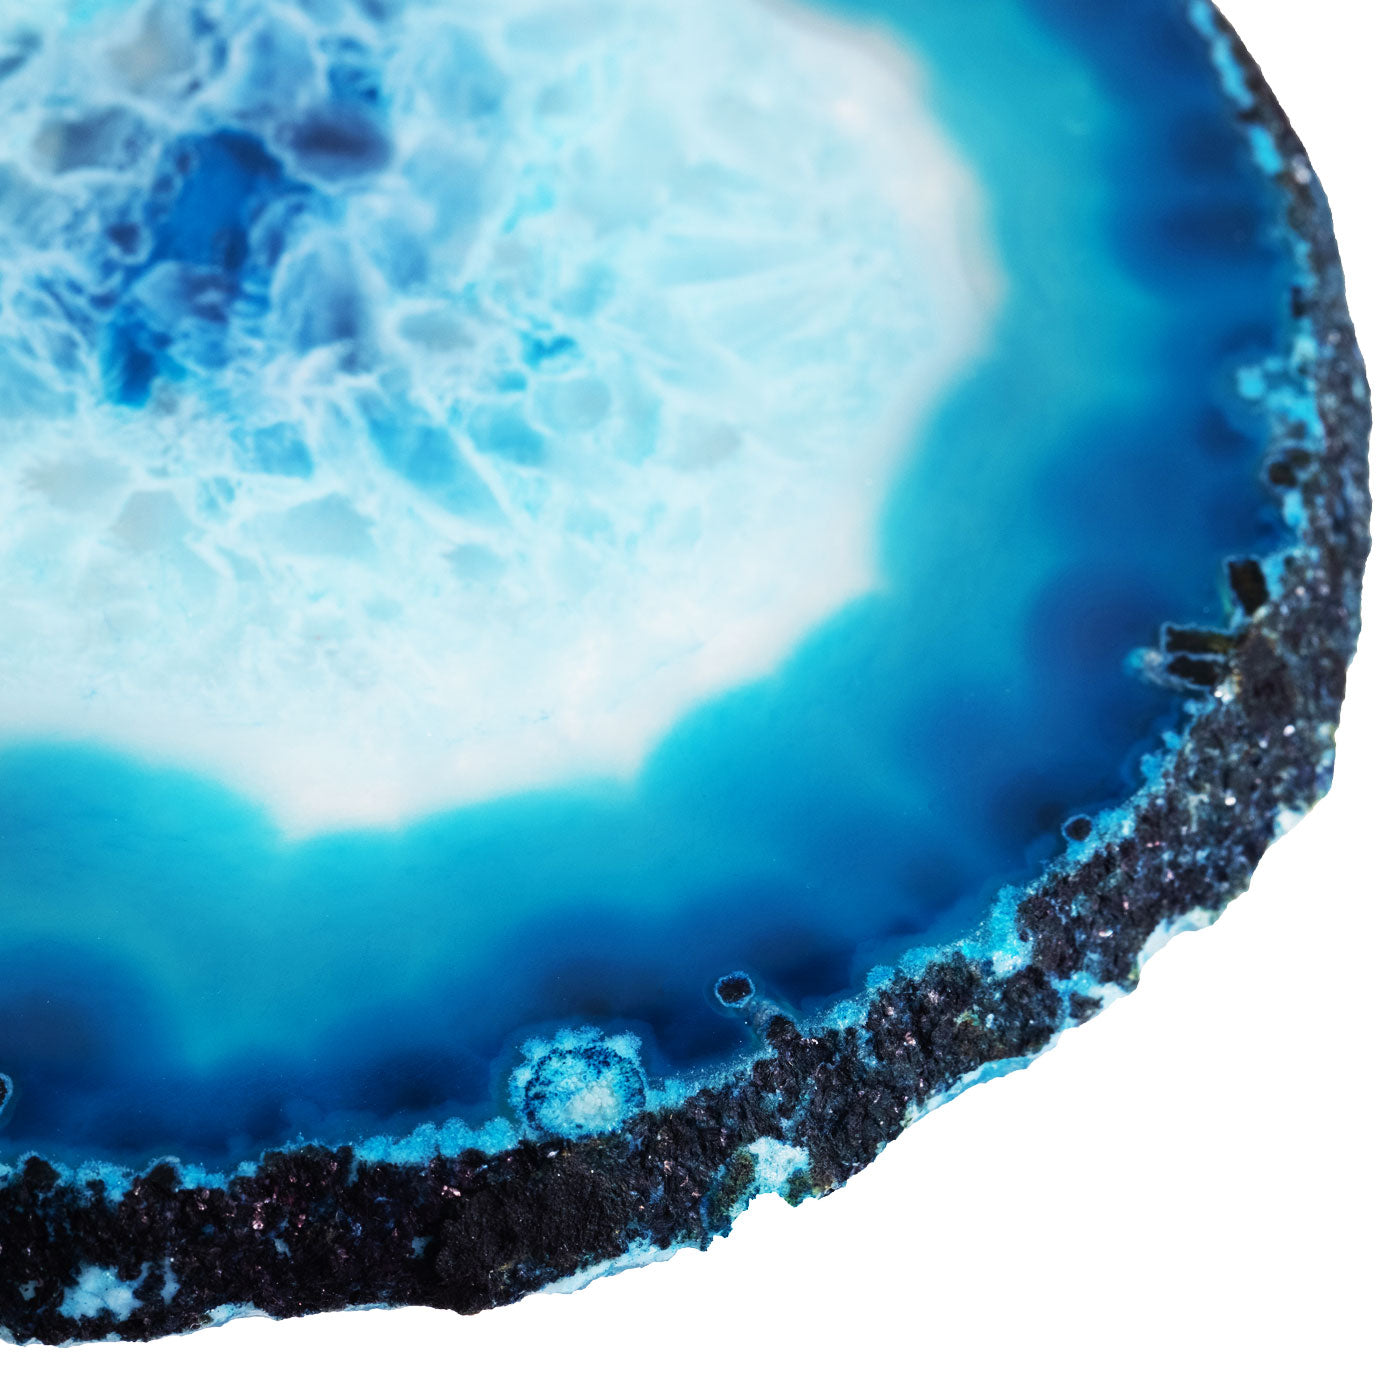 Set of 4 Natural Brazilian Agate Drink Coasters with Wood Holder - Ocean